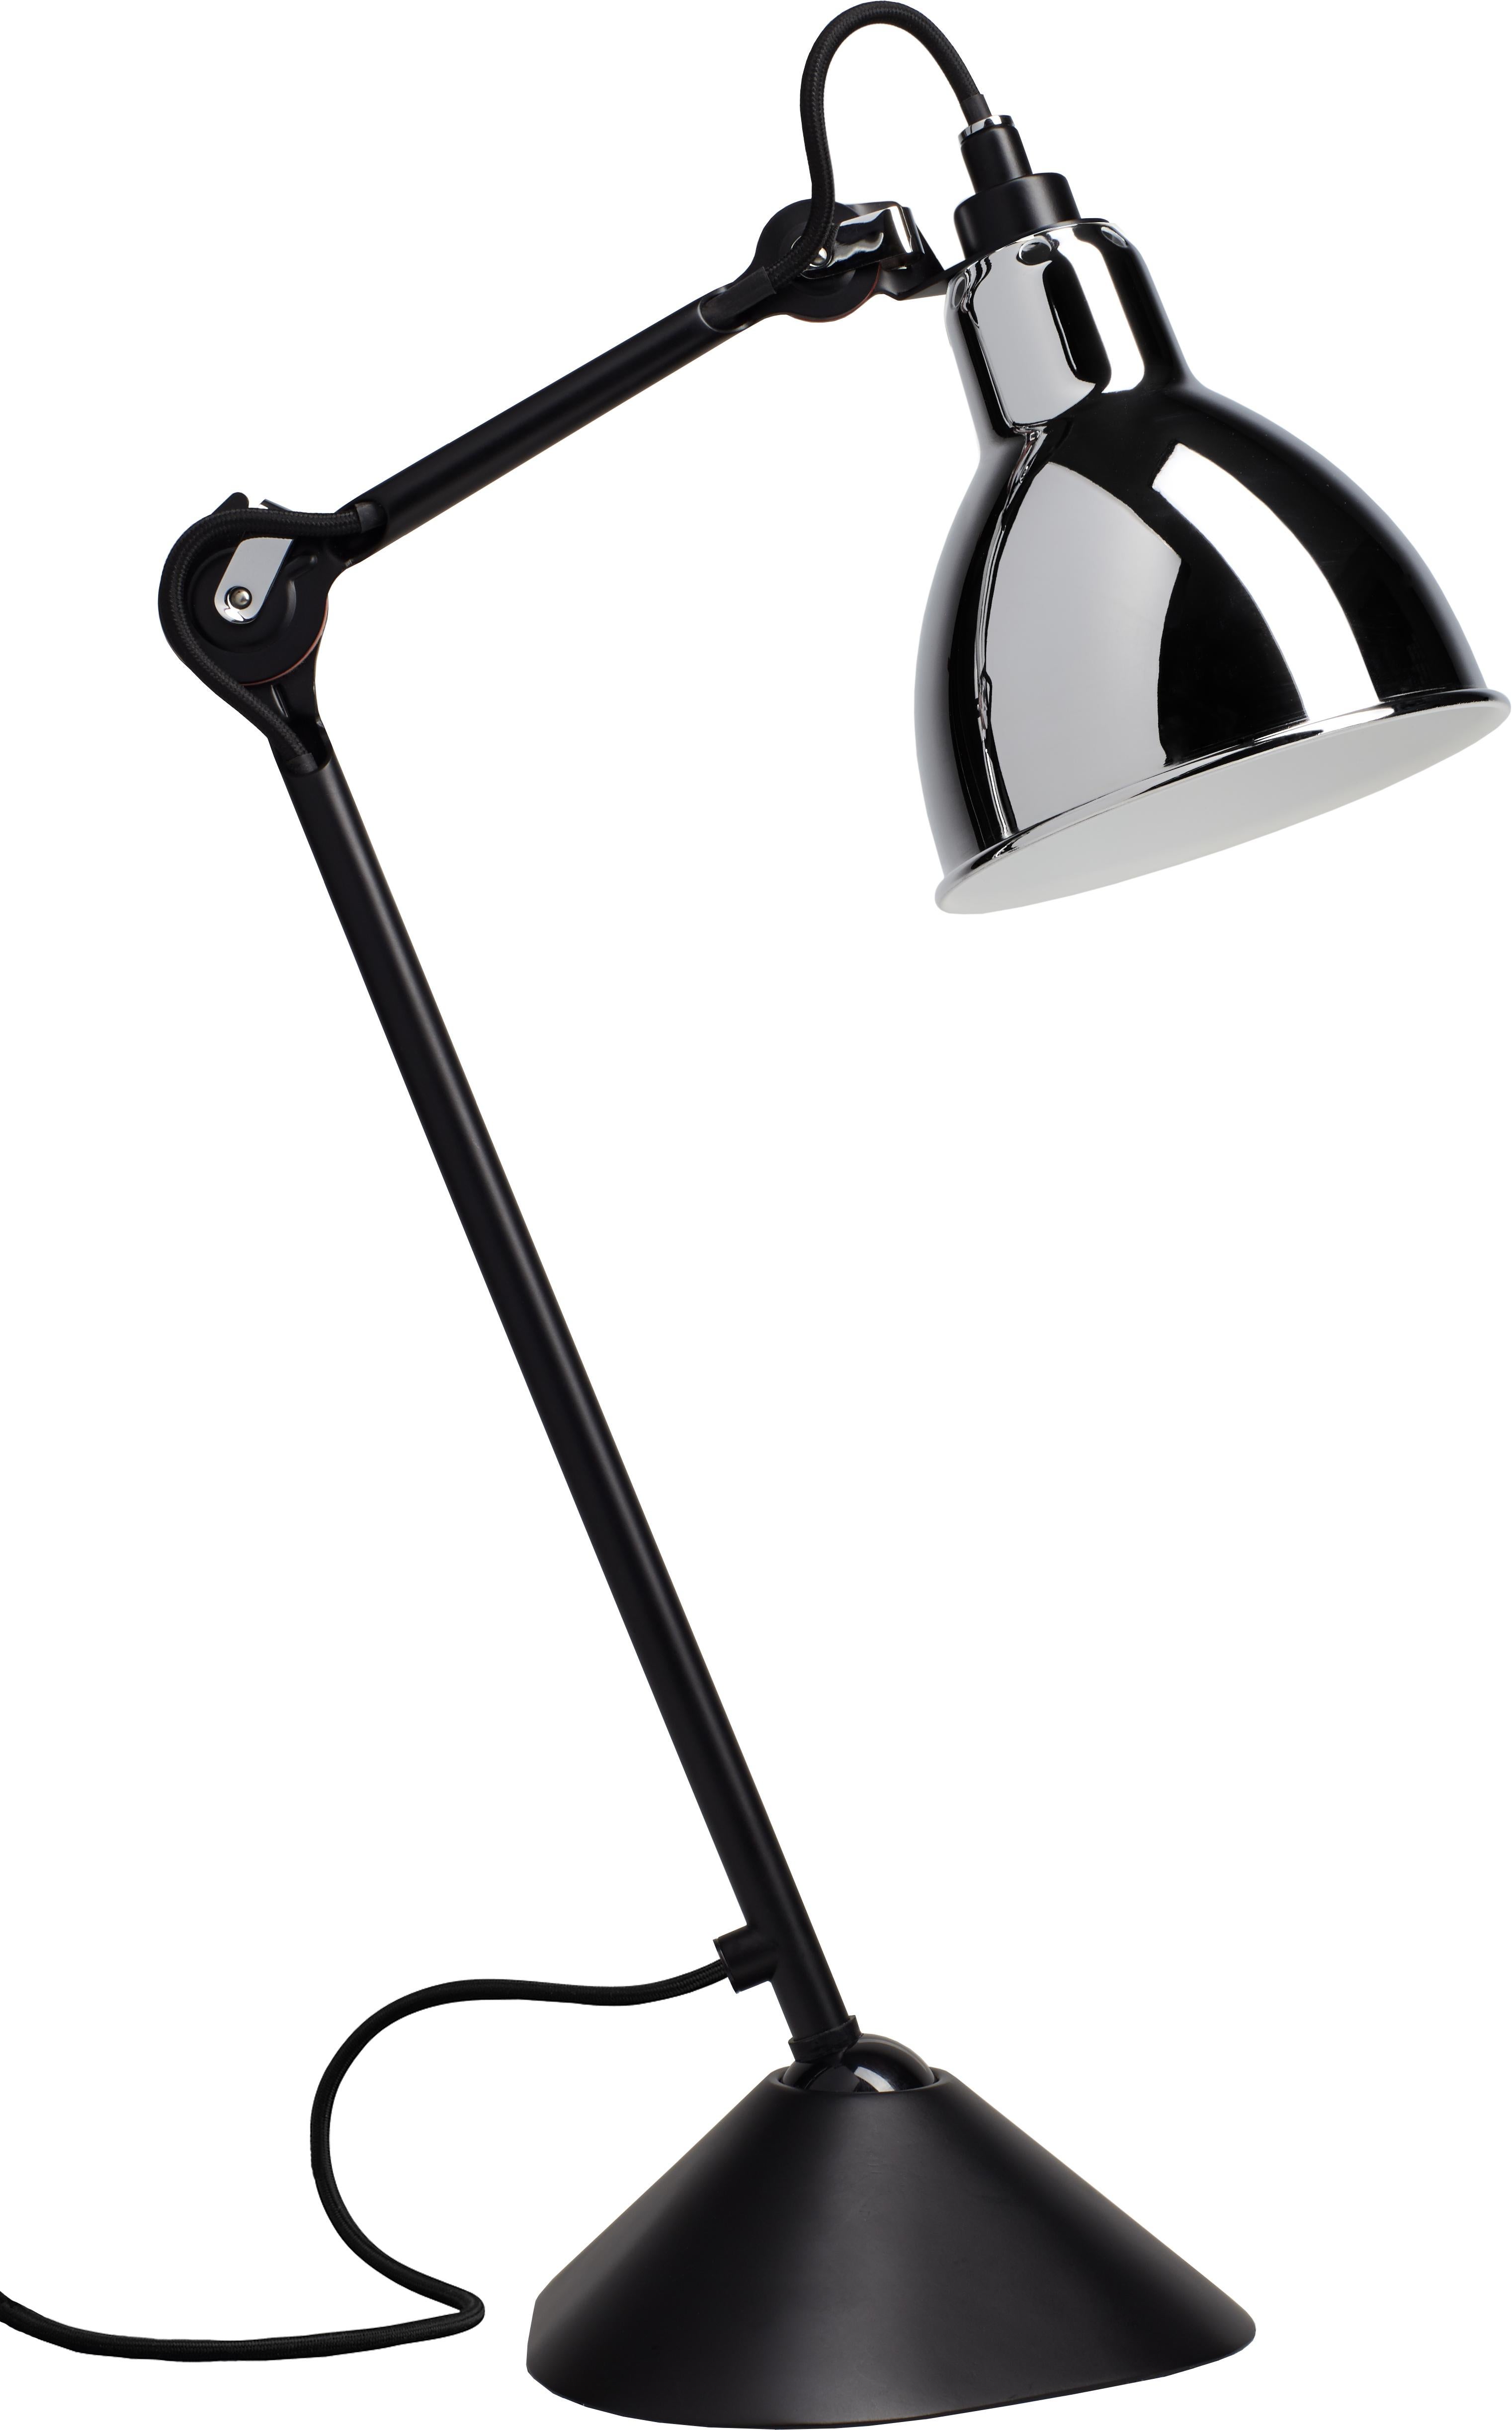 DCW Editions La Lampe Gras N°205 Table Lamp in Black Arm with Chrome Shade